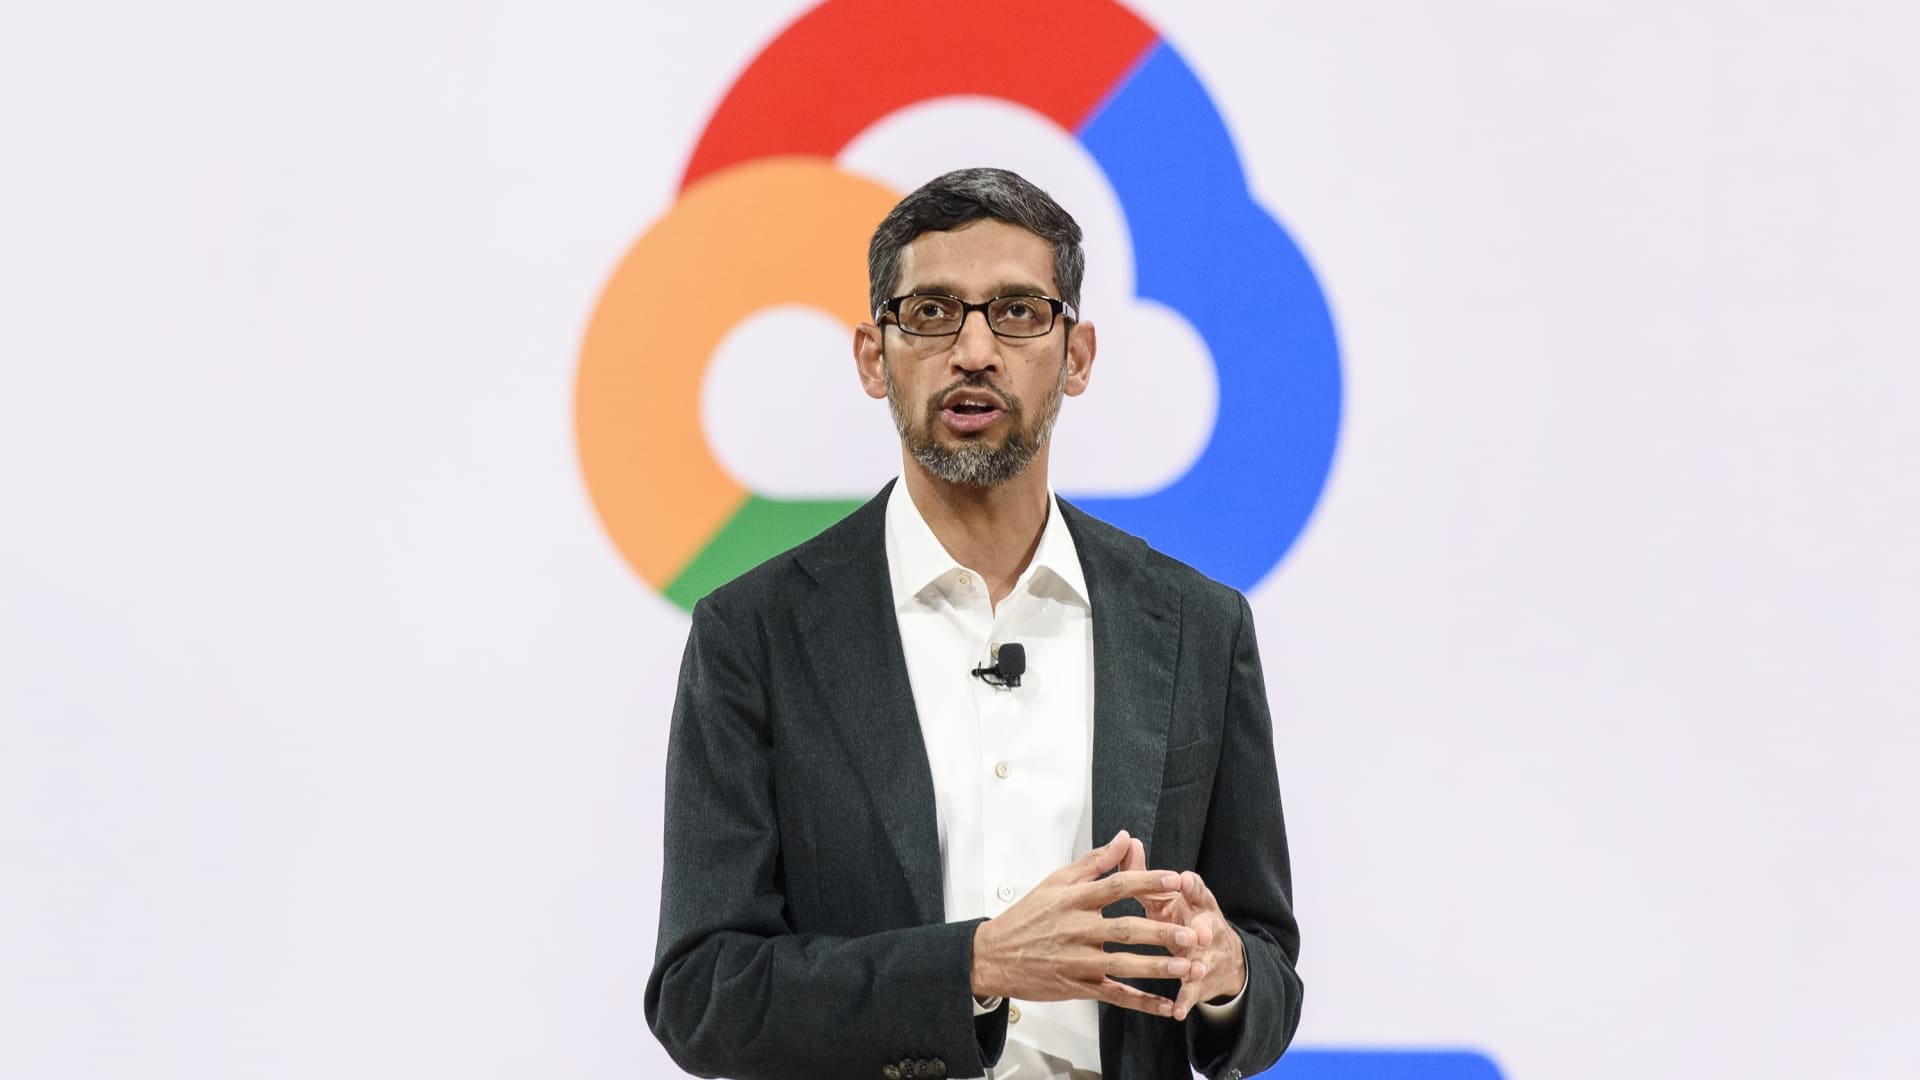 Alphabet is having its worst day since March 2020, when Covid shutdowns started in the U.S.